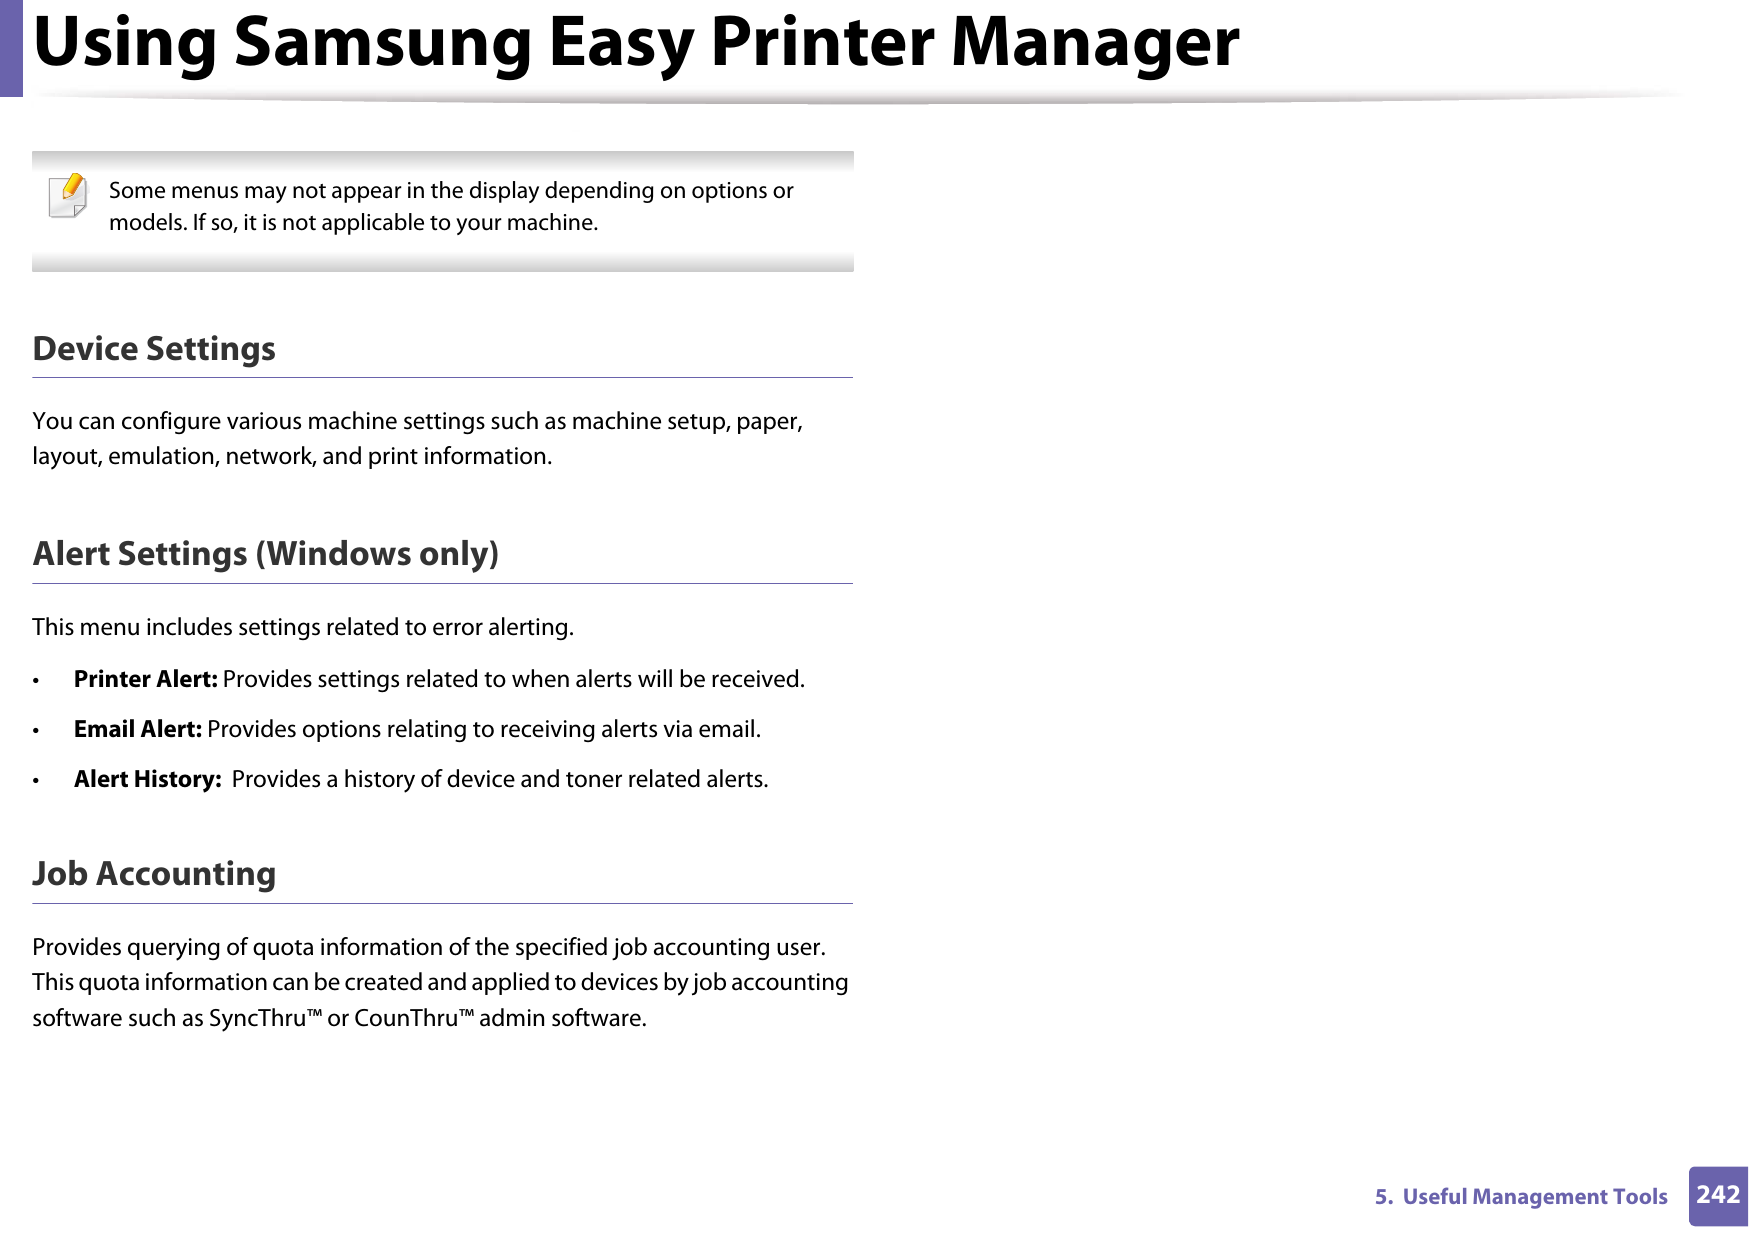 Using Samsung Easy Printer Manager2425.  Useful Management Tools Some menus may not appear in the display depending on options or models. If so, it is not applicable to your machine. Device SettingsYou can configure various machine settings such as machine setup, paper, layout, emulation, network, and print information.Alert Settings (Windows only)This menu includes settings related to error alerting. •Printer Alert: Provides settings related to when alerts will be received.•Email Alert: Provides options relating to receiving alerts via email.•Alert History:  Provides a history of device and toner related alerts.Job AccountingProvides querying of quota information of the specified job accounting user. This quota information can be created and applied to devices by job accounting software such as SyncThru™ or CounThru™ admin software.